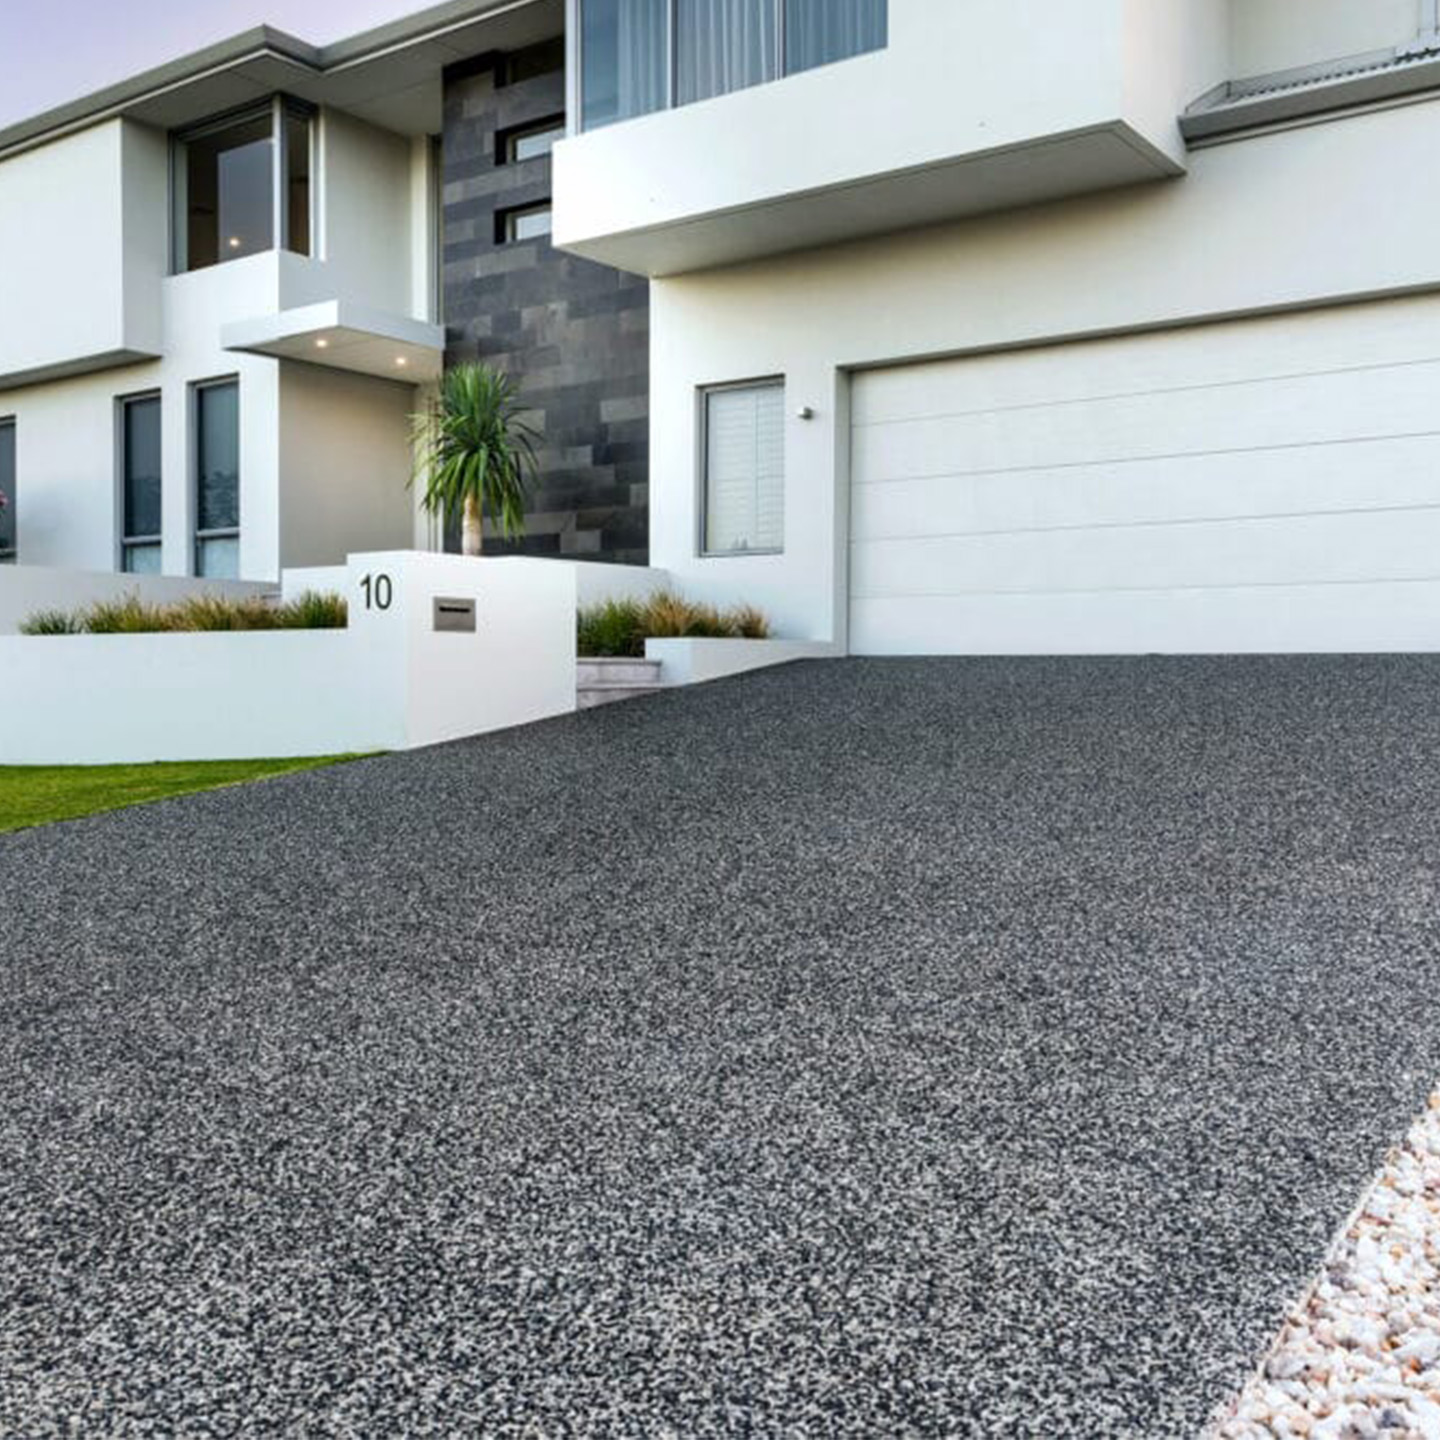 What is the difference between honed and exposed aggregate?